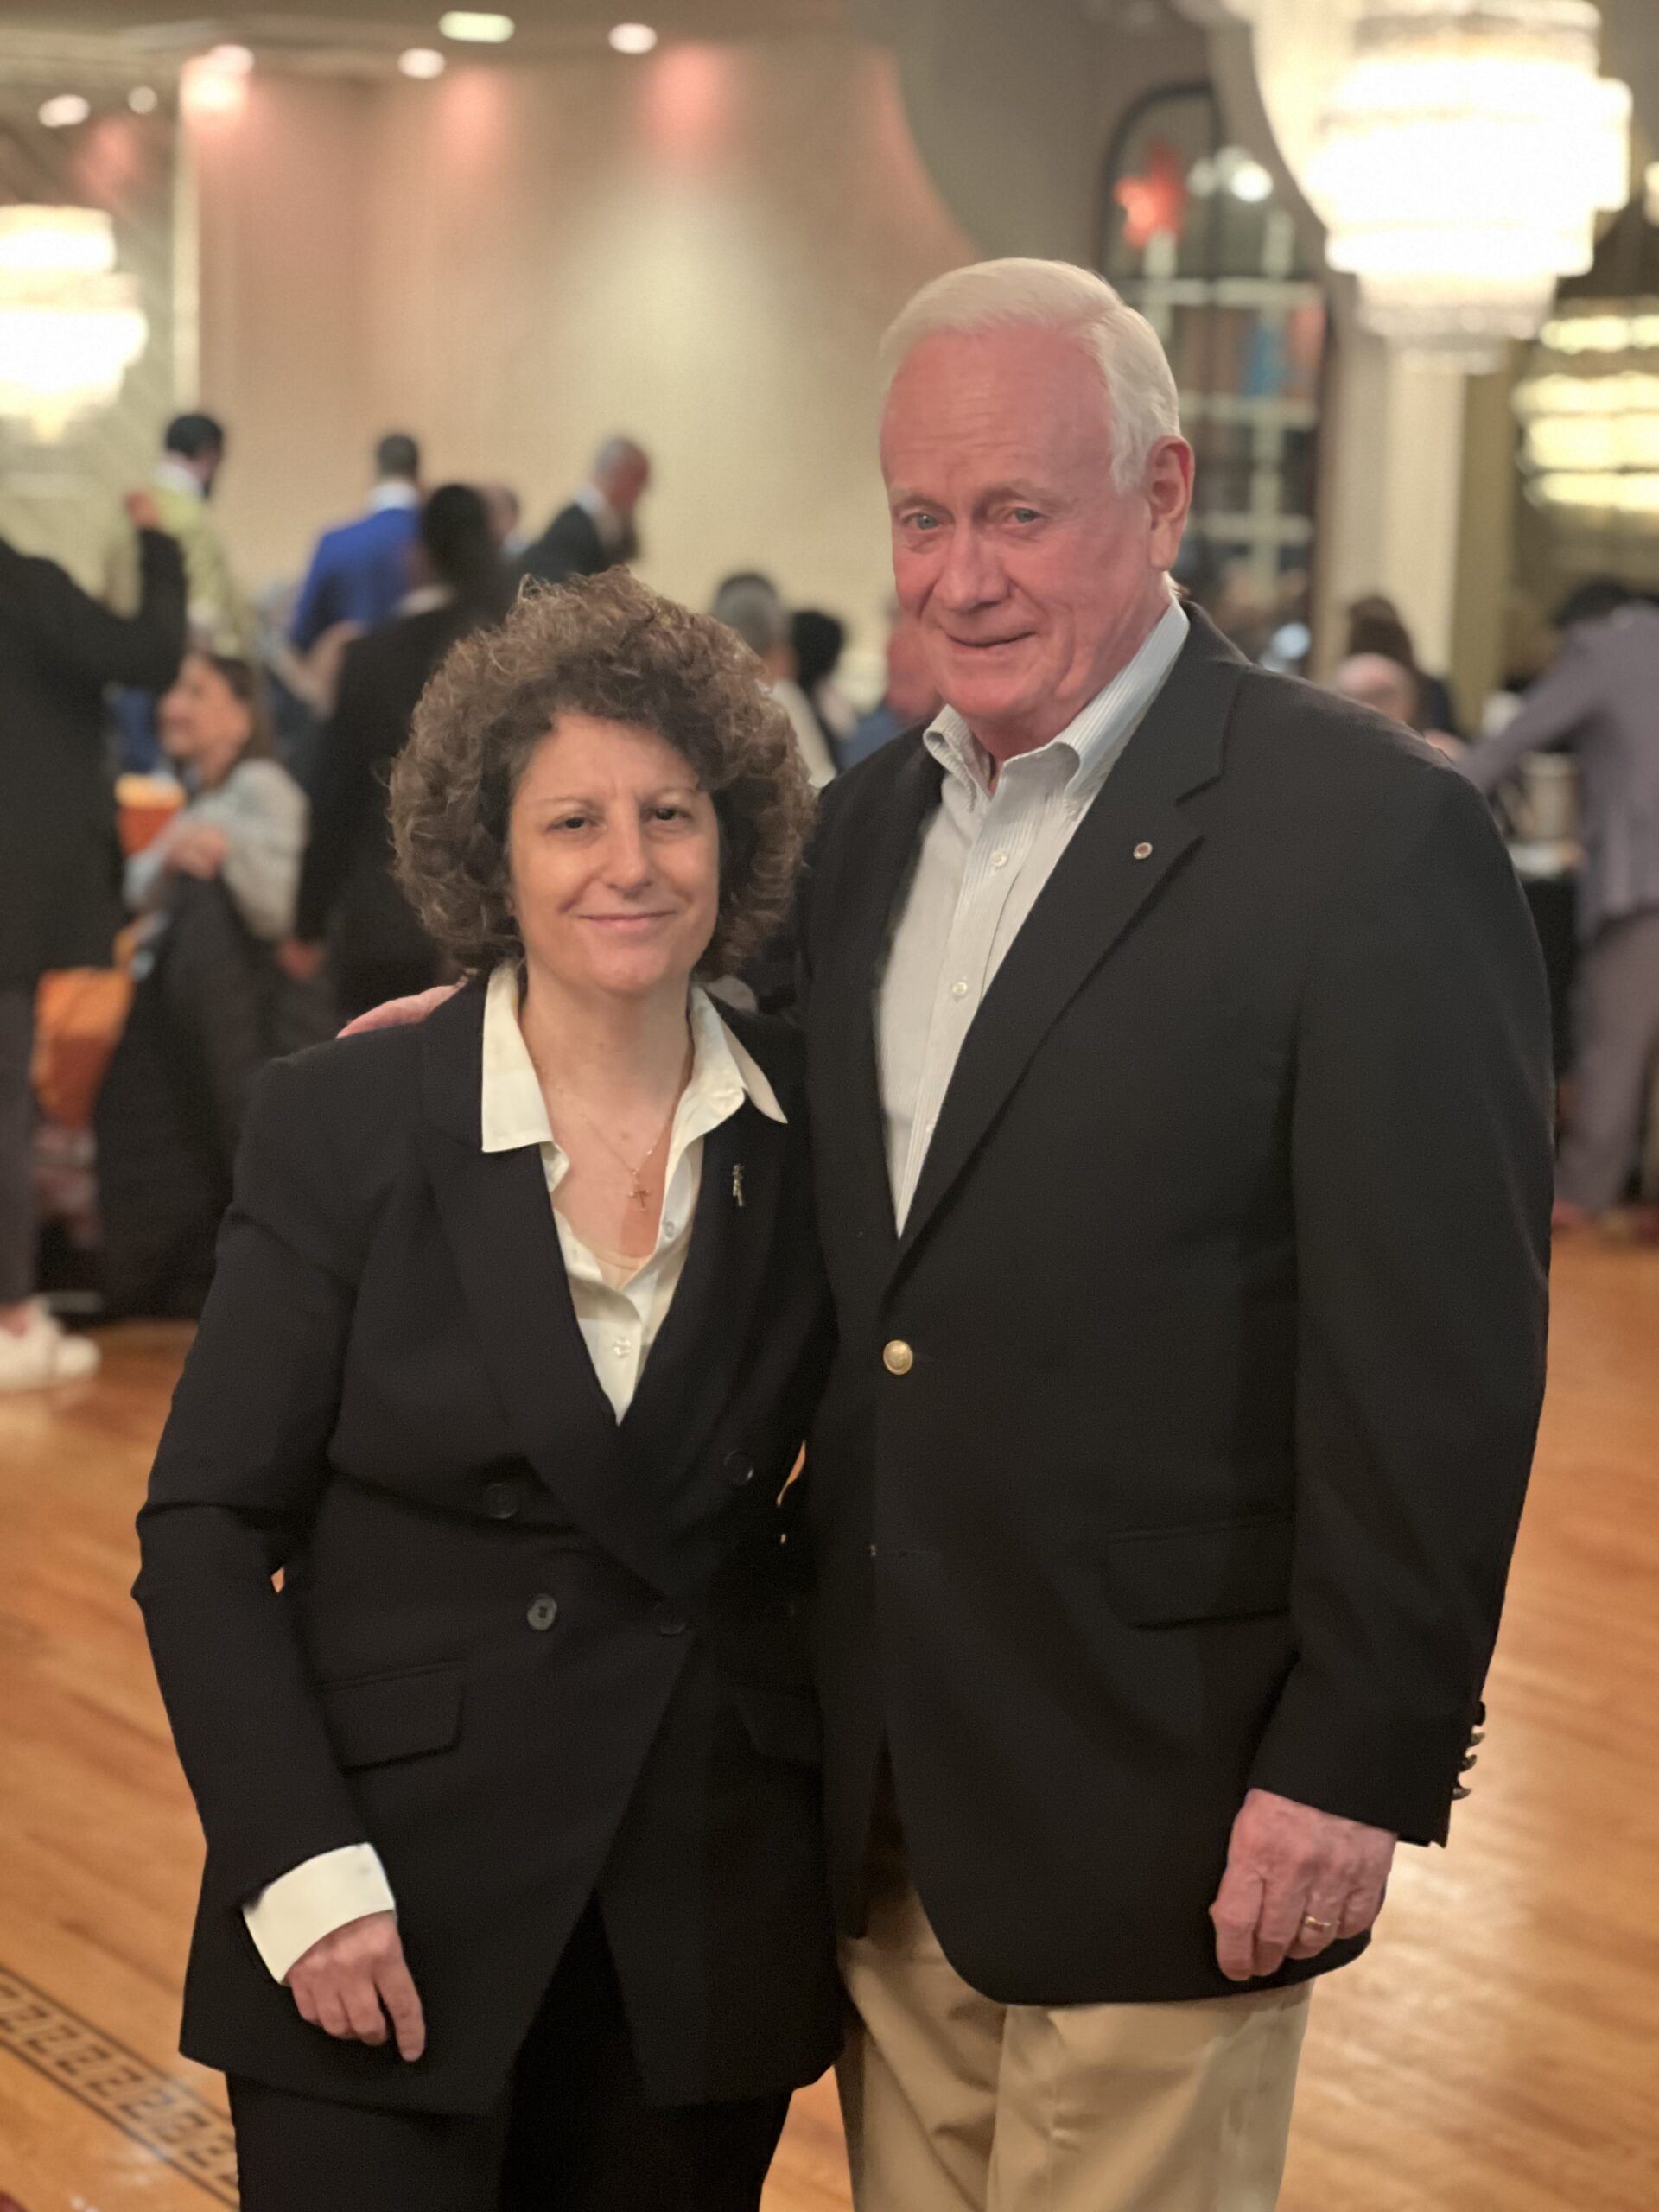 (From left) Fran Vella-Marrone, chairwoman, Kings County Conservative Party; and former State Sen. Marty Golden at KCCP Annual Reception.